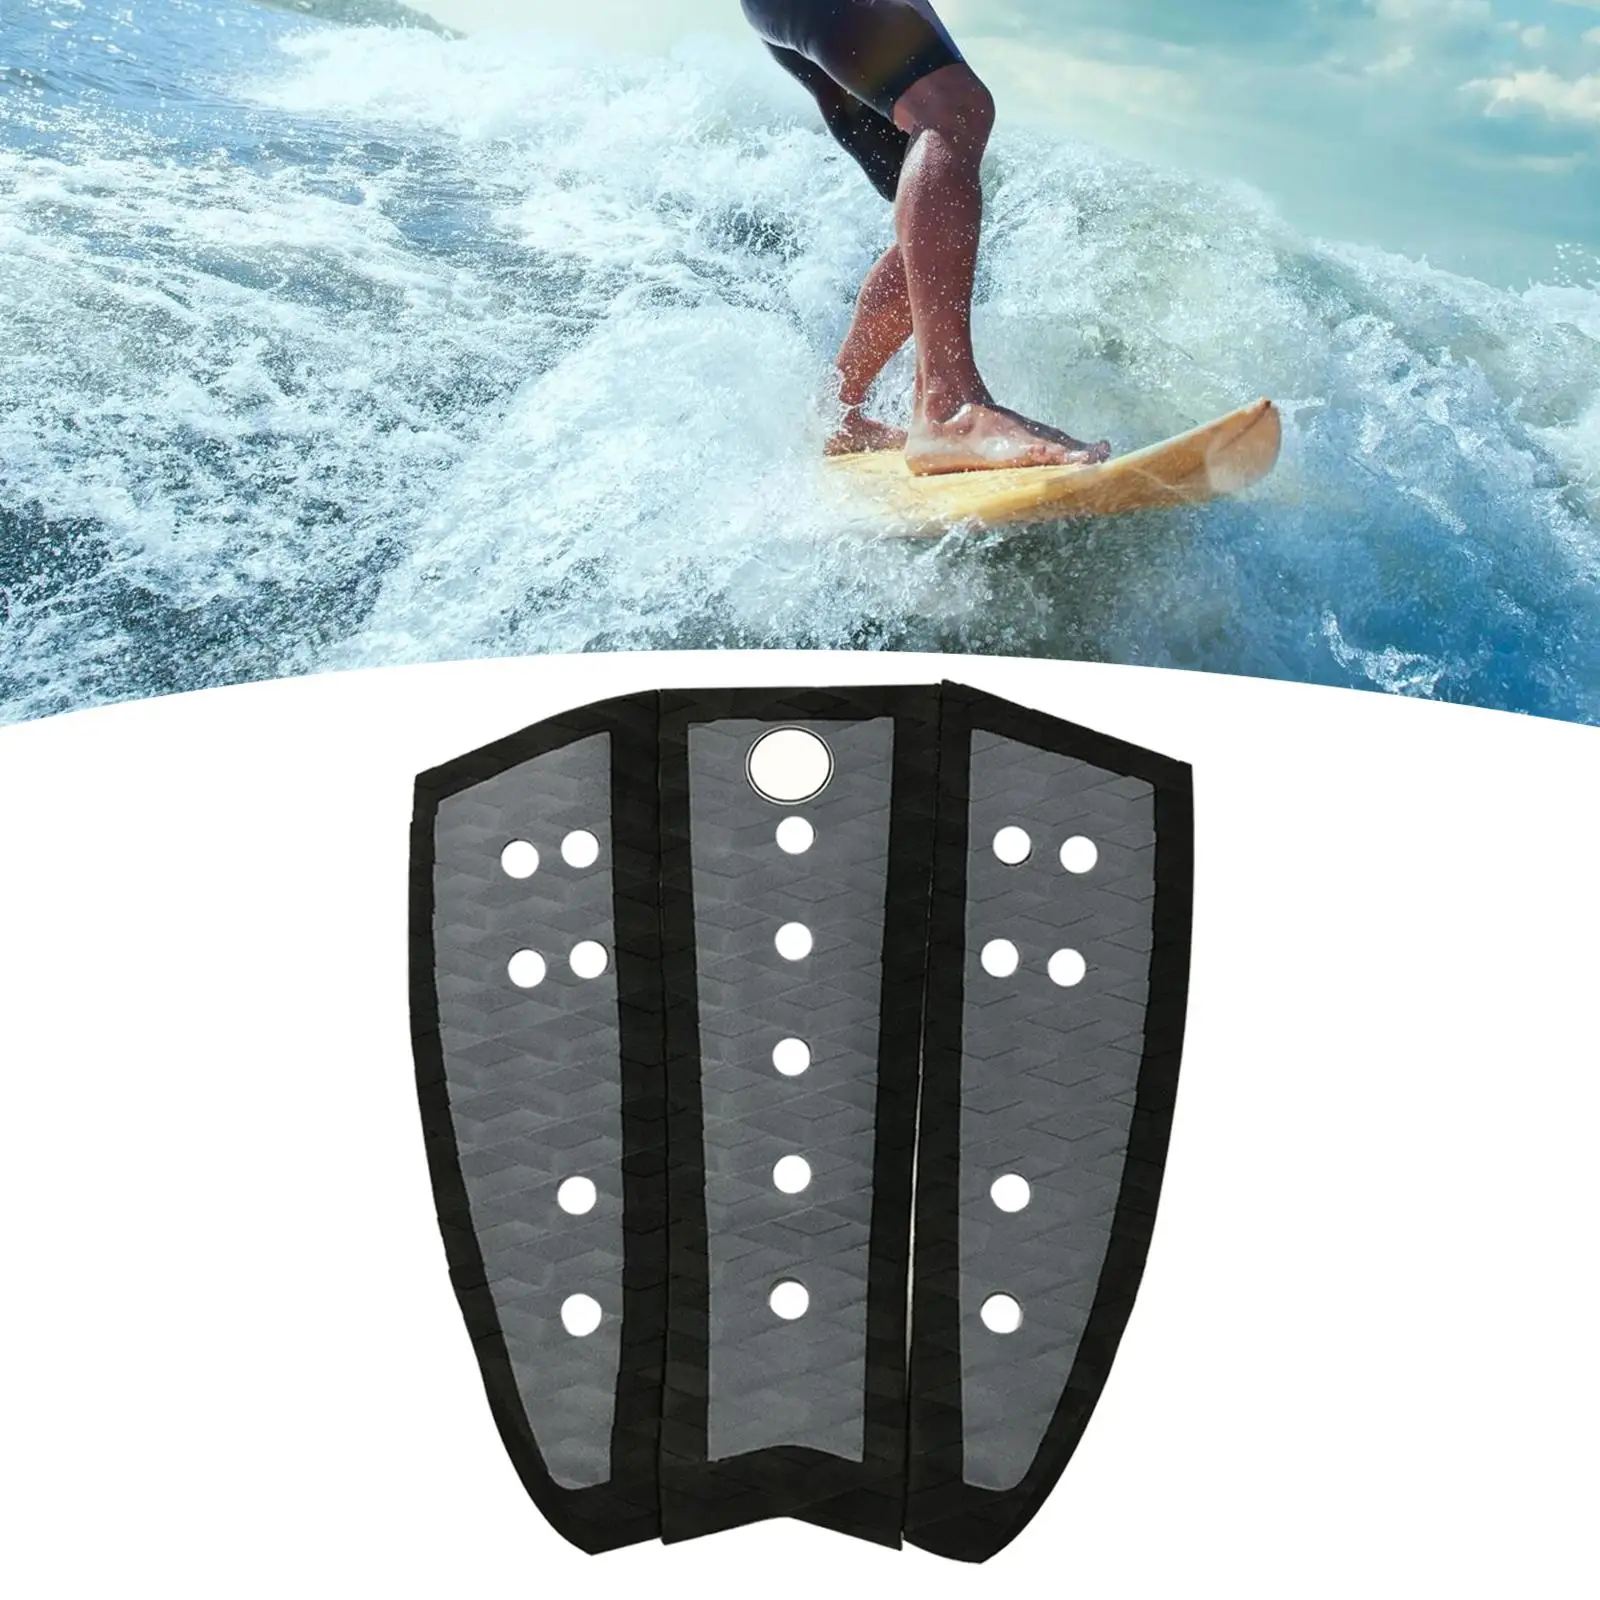 3x EVA Surfboard Traction Pad Surfing Padding Deck Pad Mat for Fish Board